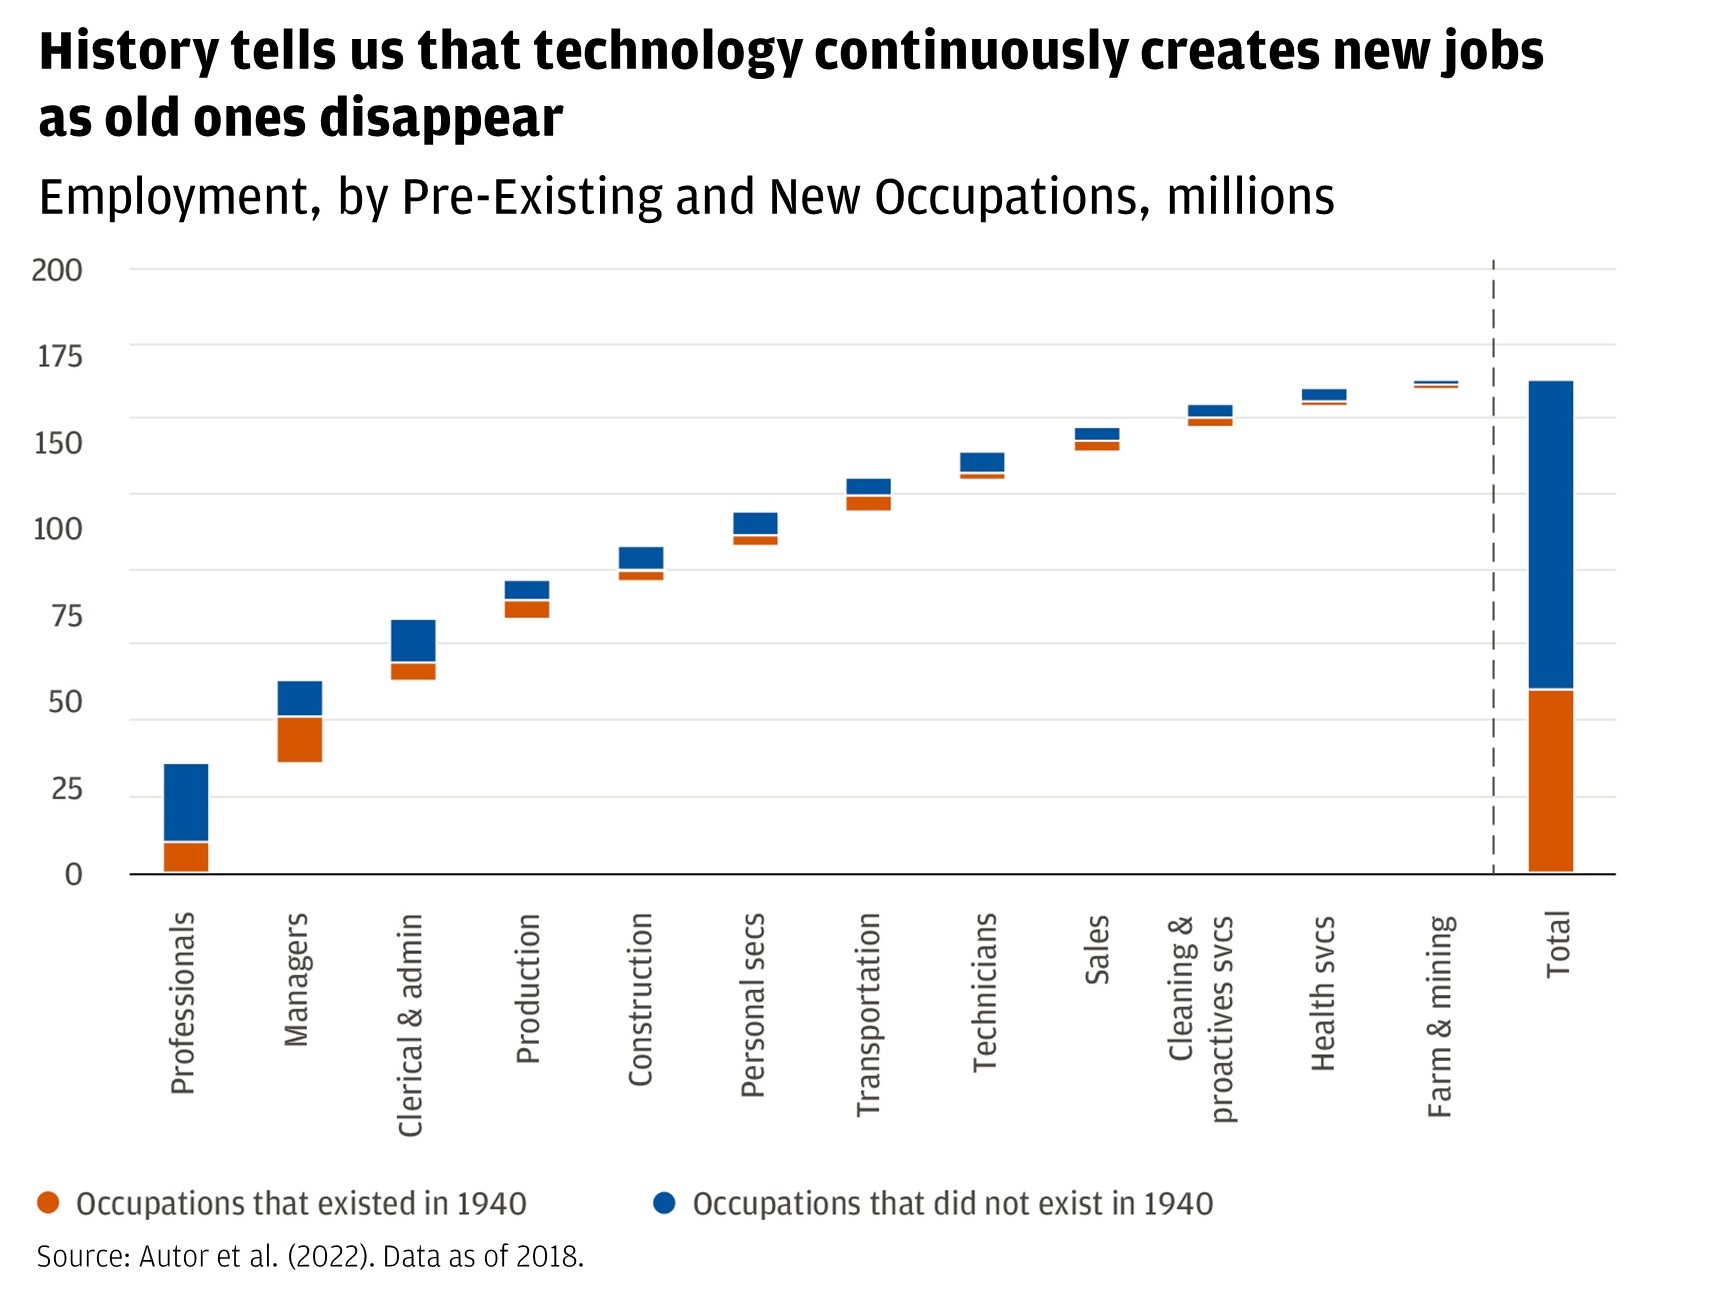 Chart describes employment, by pre-existing and new occupations in millions